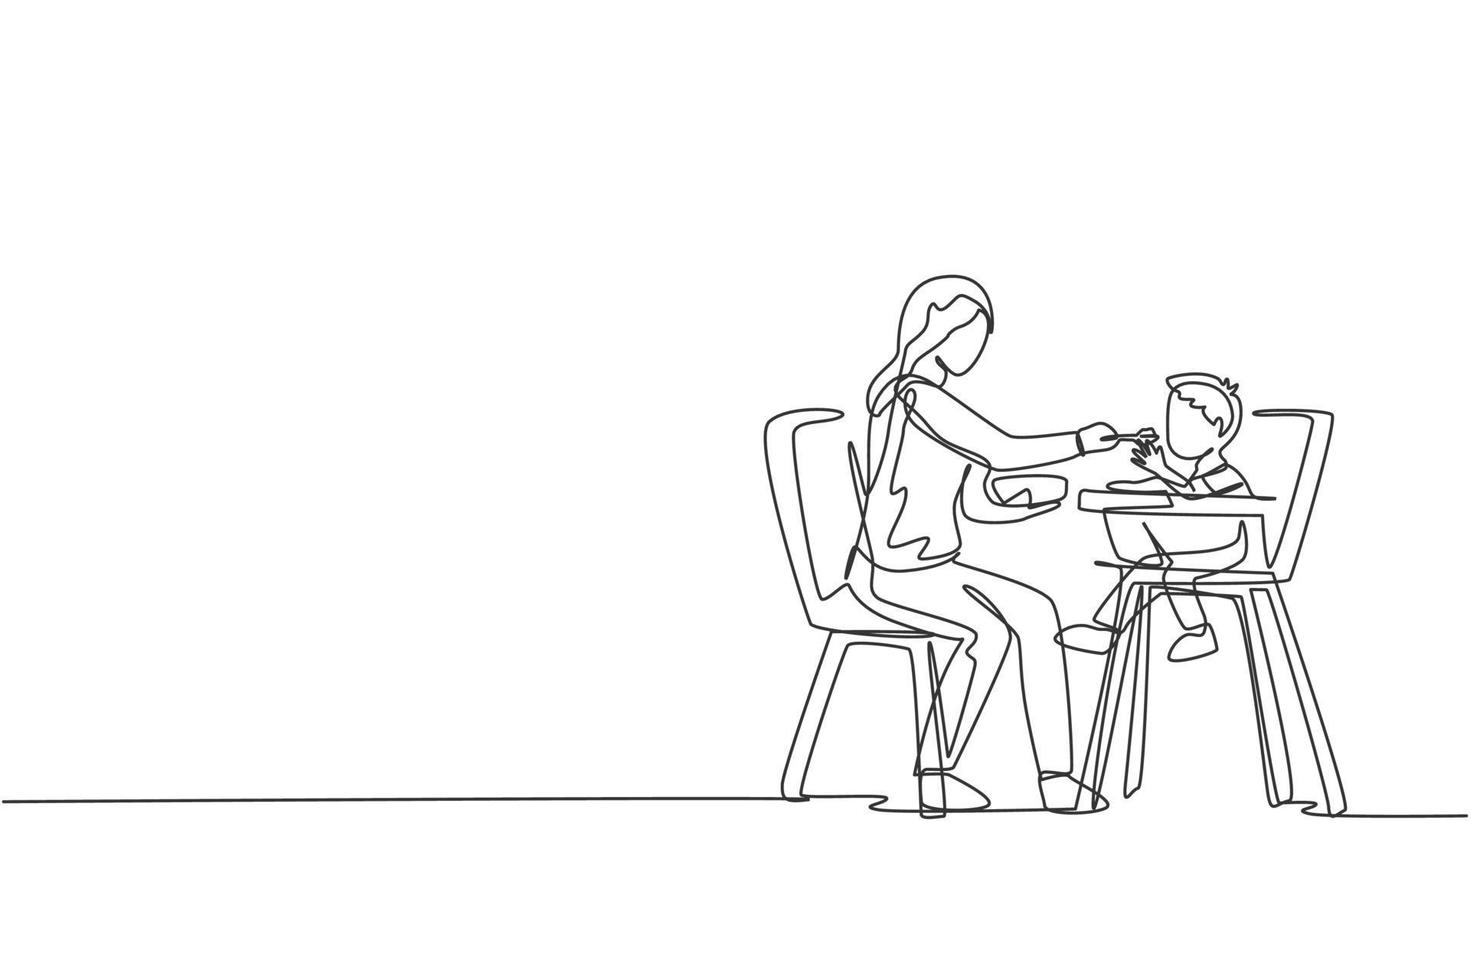 One single line drawing of young mother feeding her son a meal who sit at baby dining chair at home vector graphic illustration. Happy family parenting concept. Modern continuous line draw design